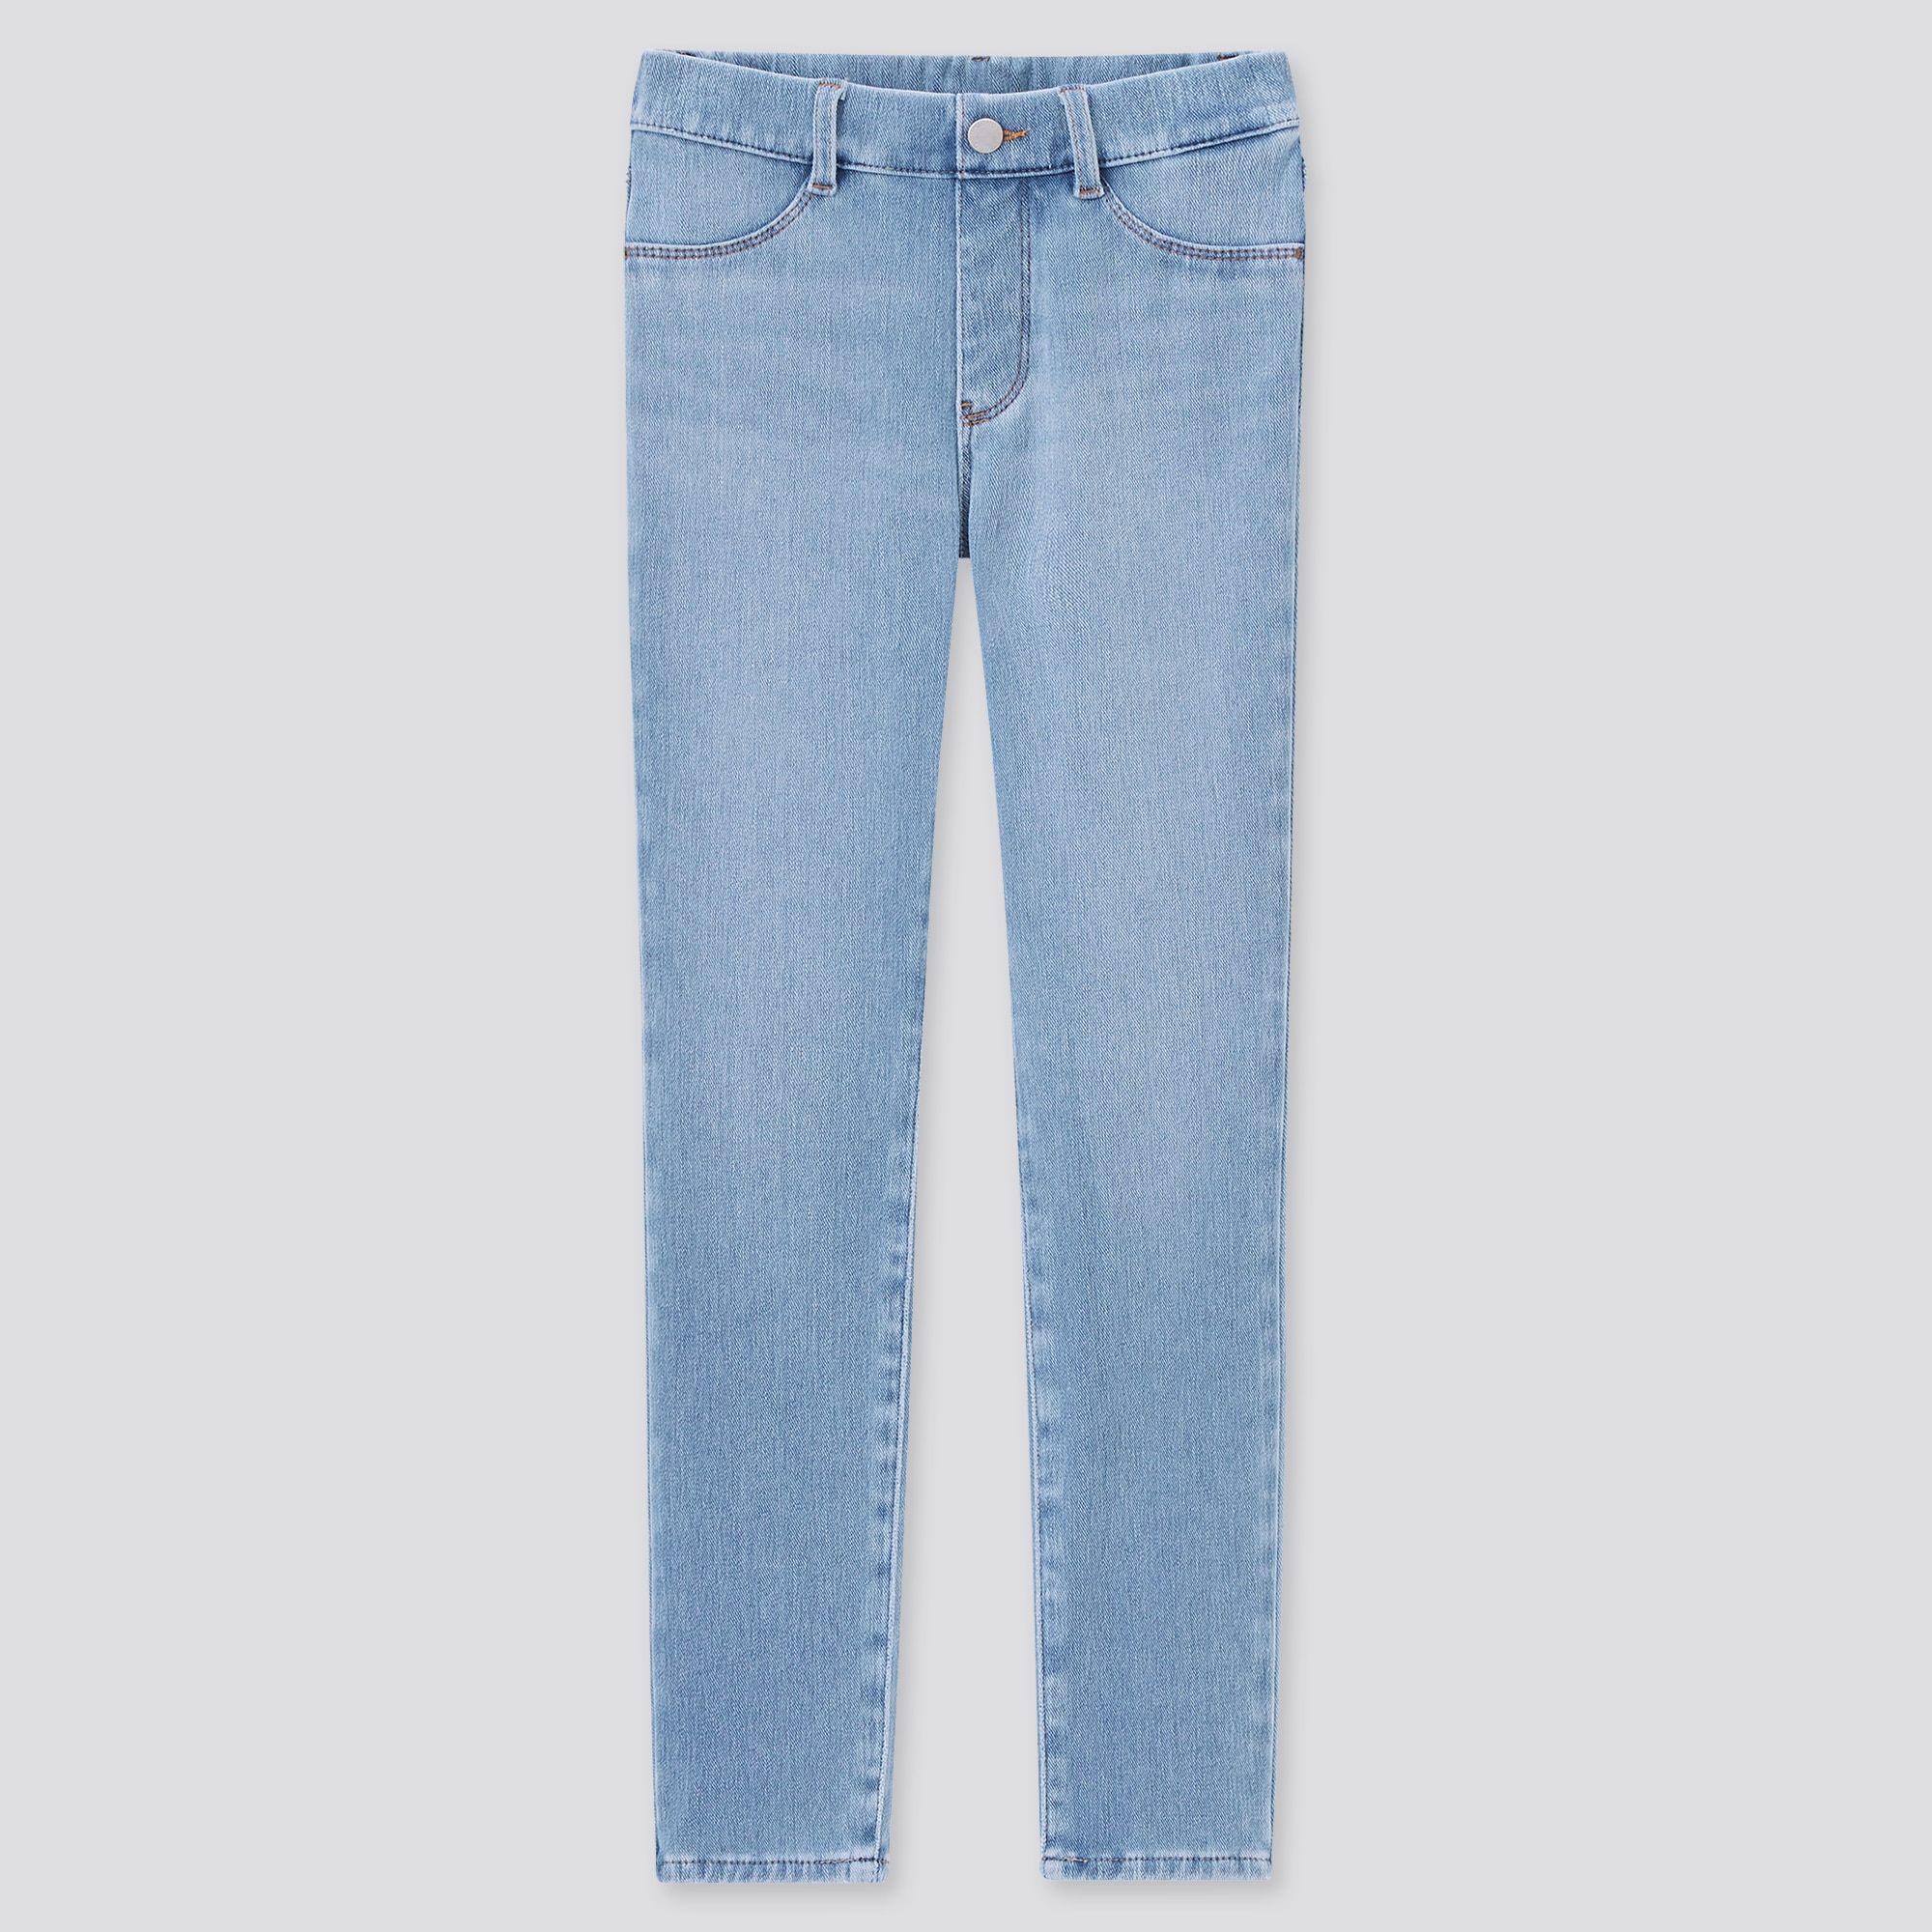 Uniqlo Ultra Stretch Denim Leggings Pants – the best products in